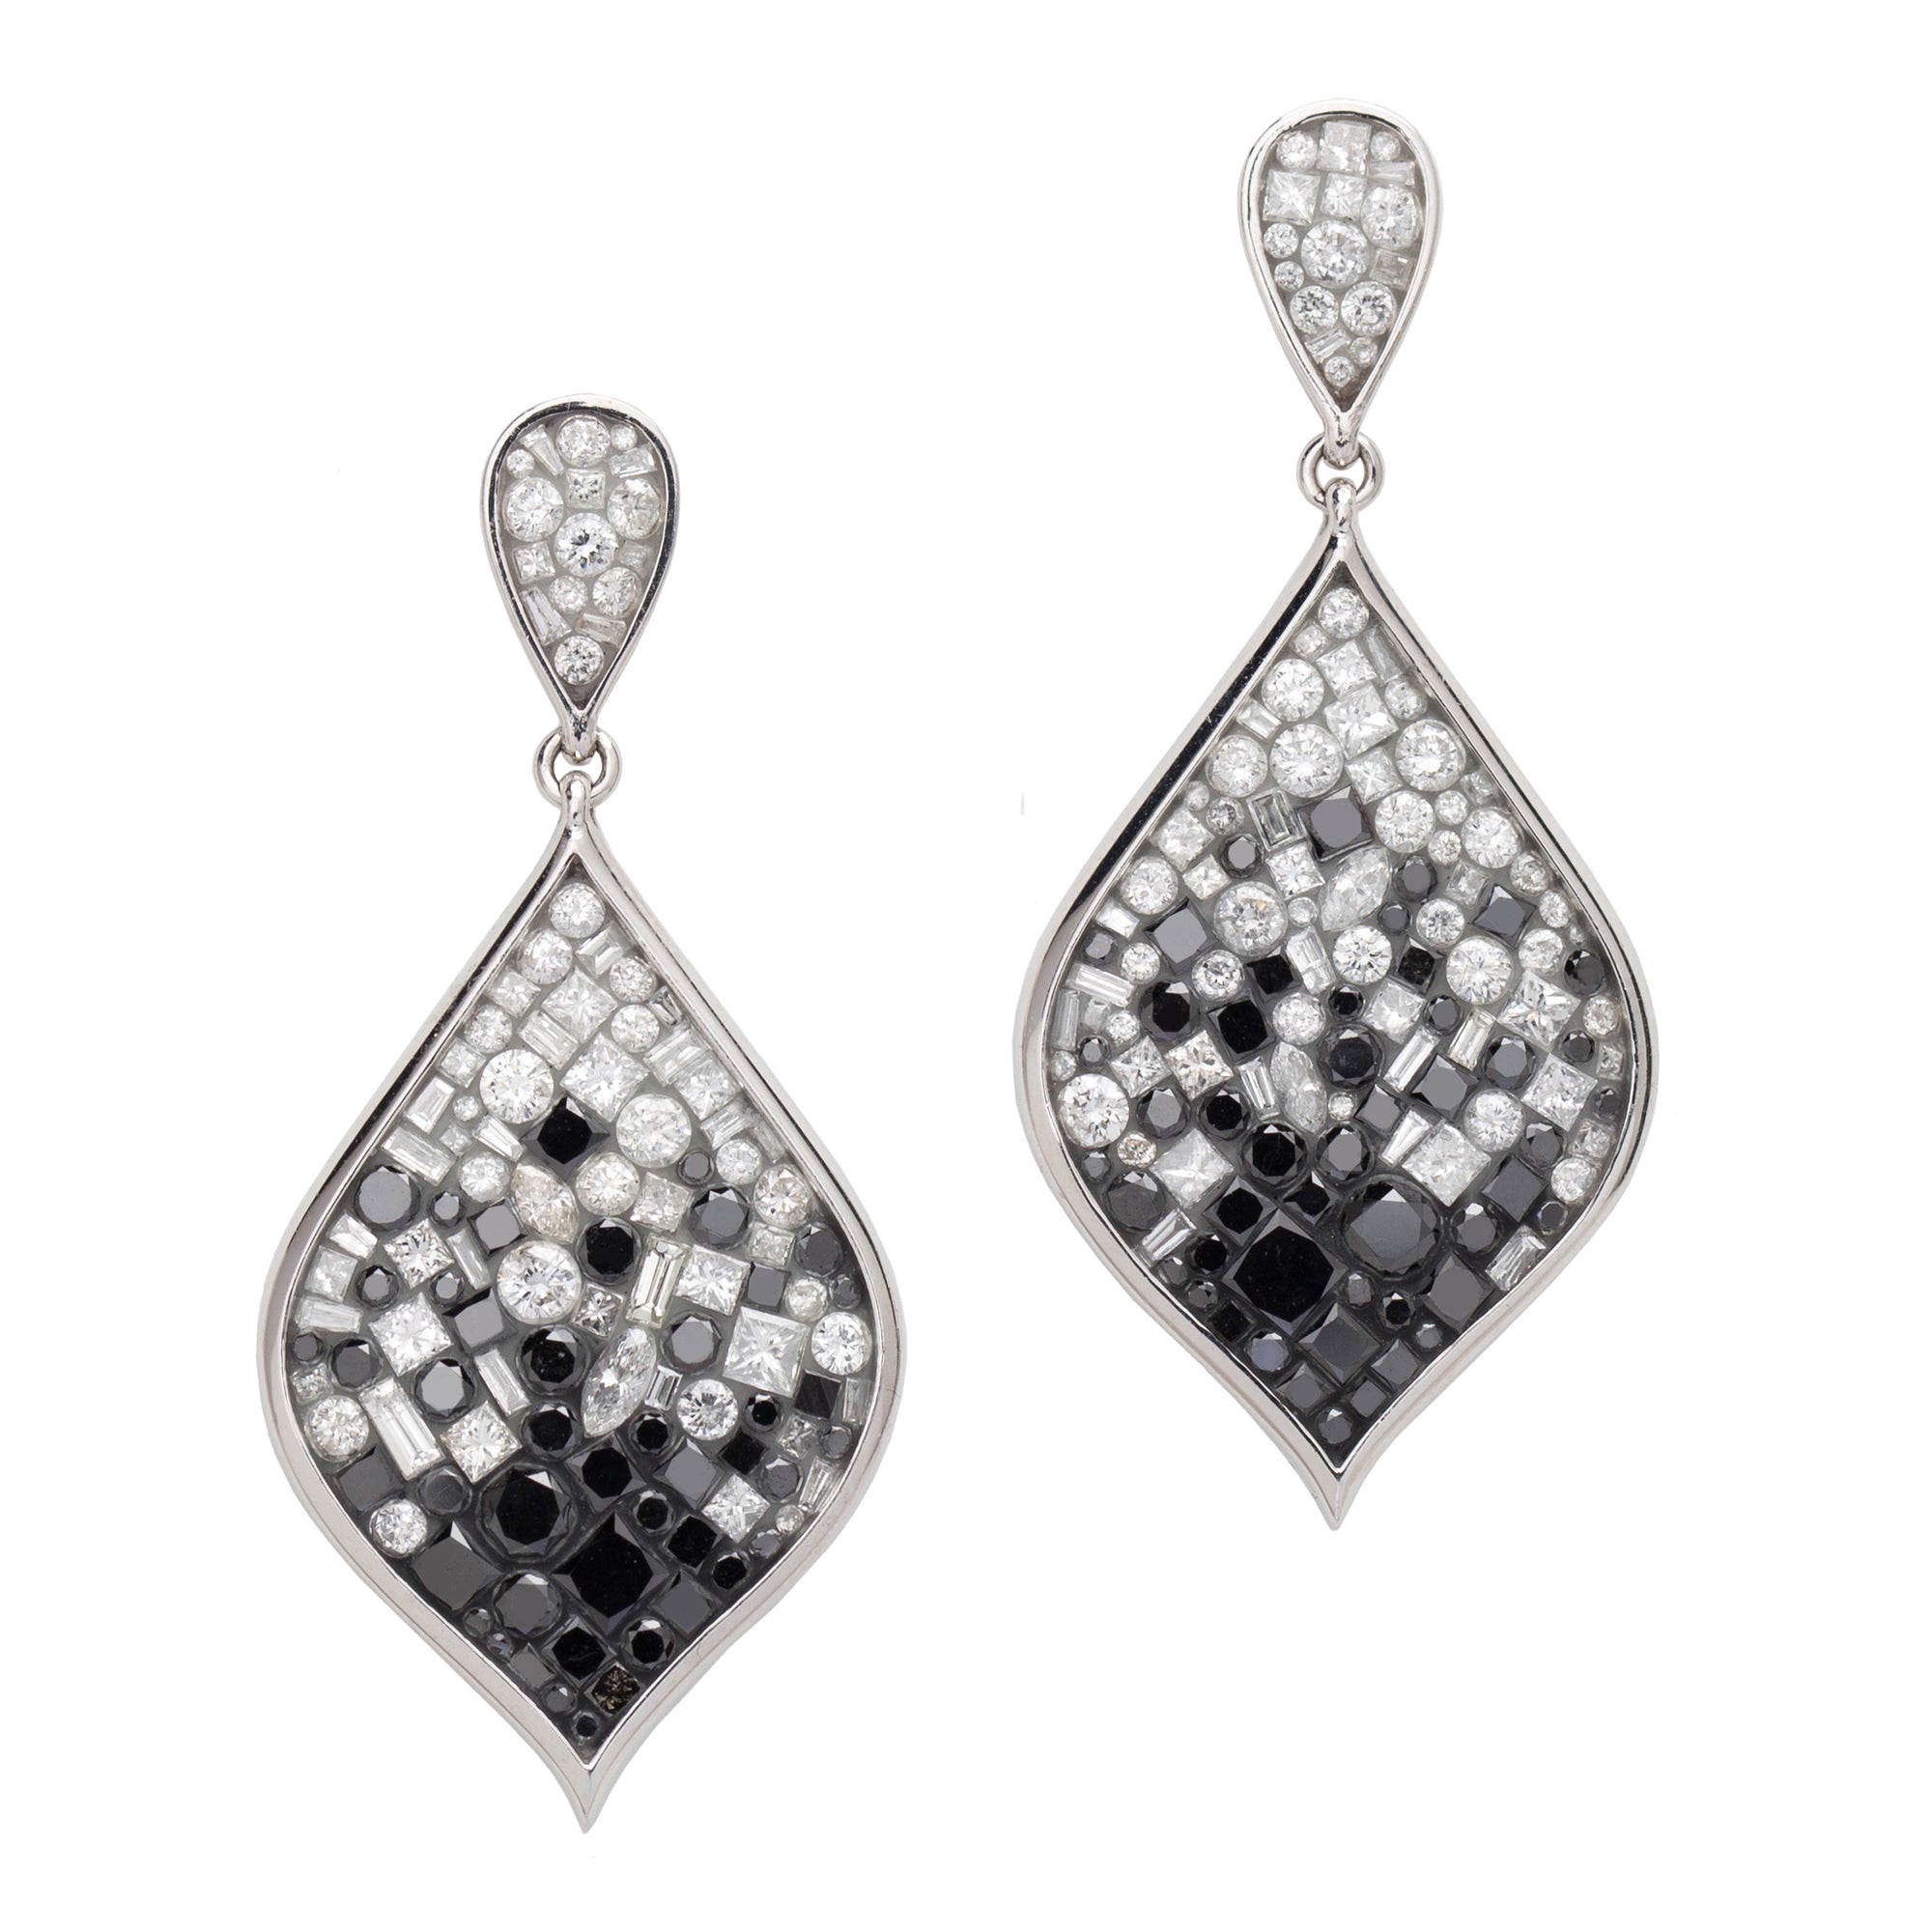 Black Ombre Genie Bottle Diamond Earrings by Pleve available at Talisman Collection Fine Jewelers in El Dorado Hills, CA and online. Specs: 18k wg dia & color enhanced dia 5.00 cttw